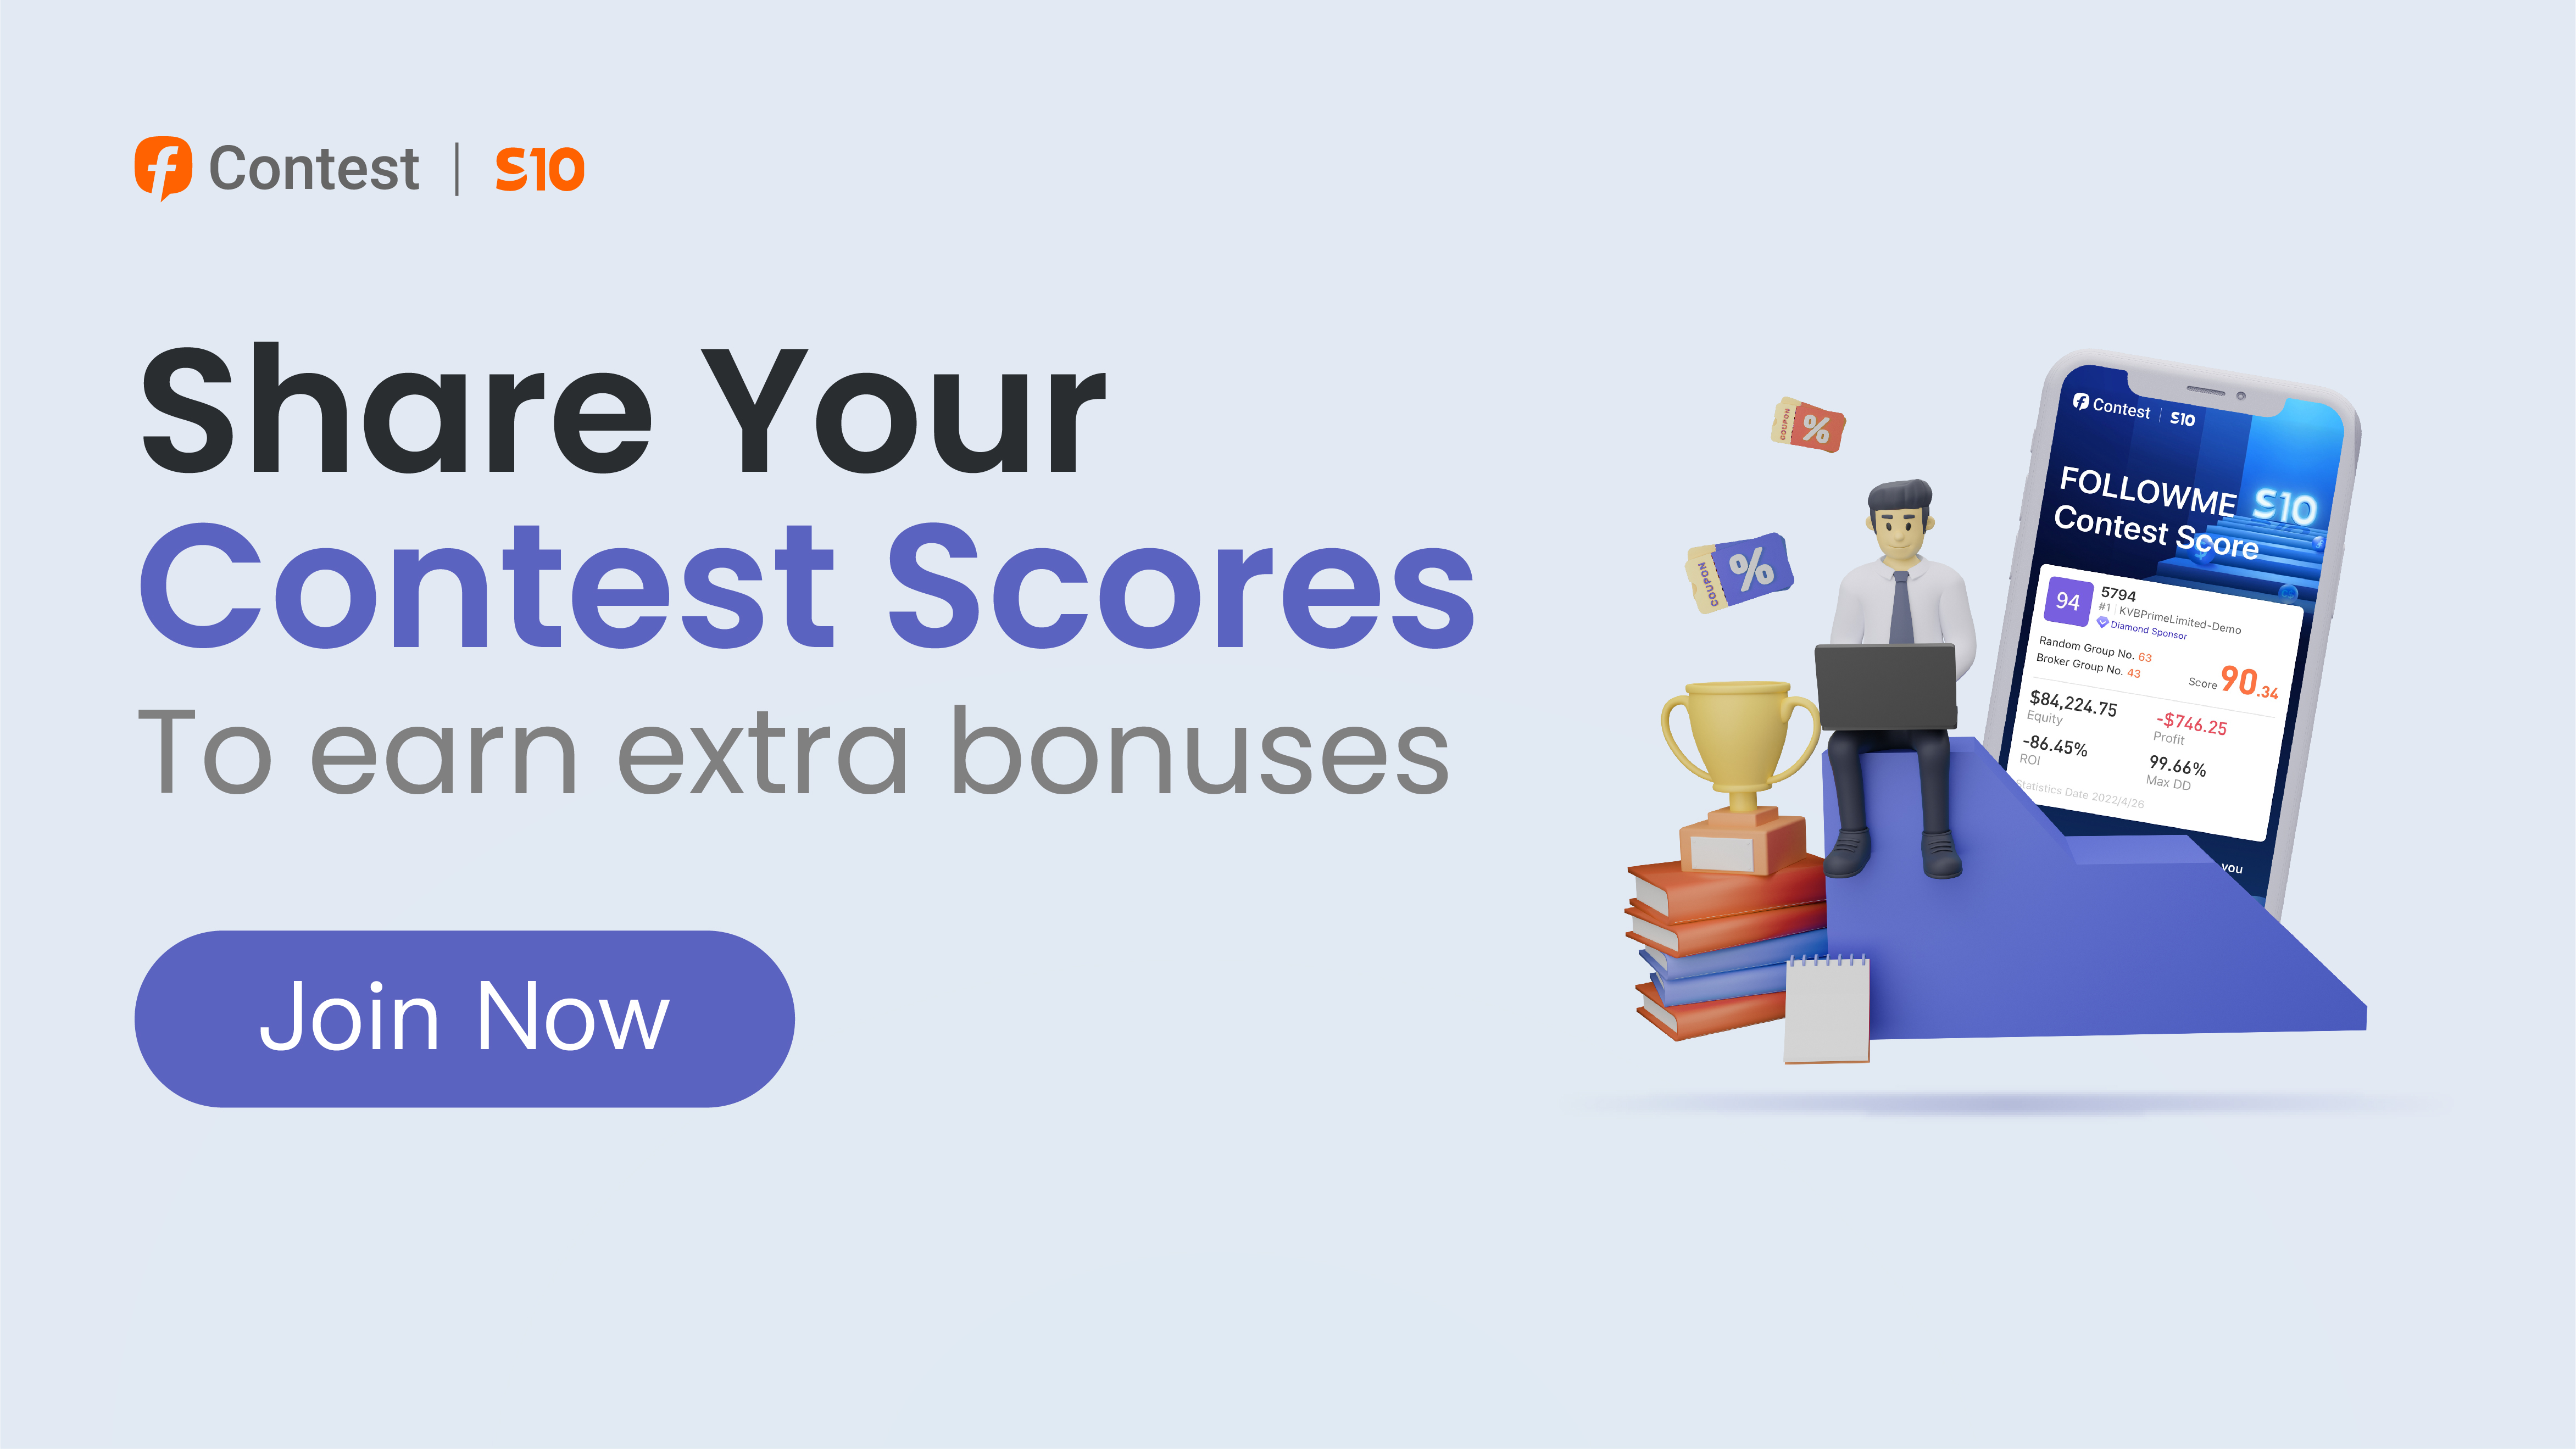 Share your score and get extra bonuses!